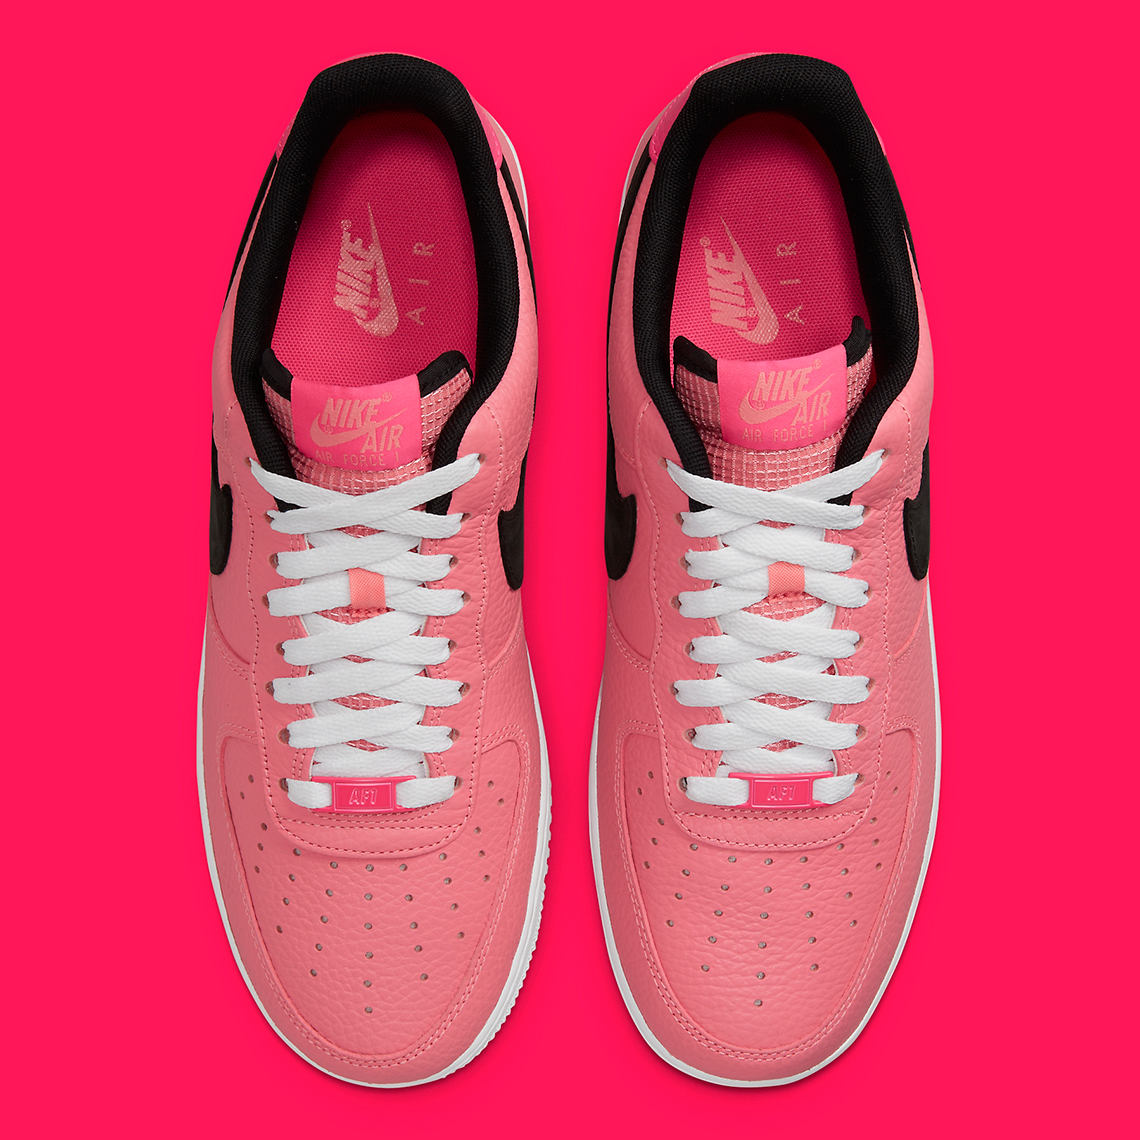 nike-air-force-1-low-pink-tumbled-leather-DZ4861-600-5.jpg